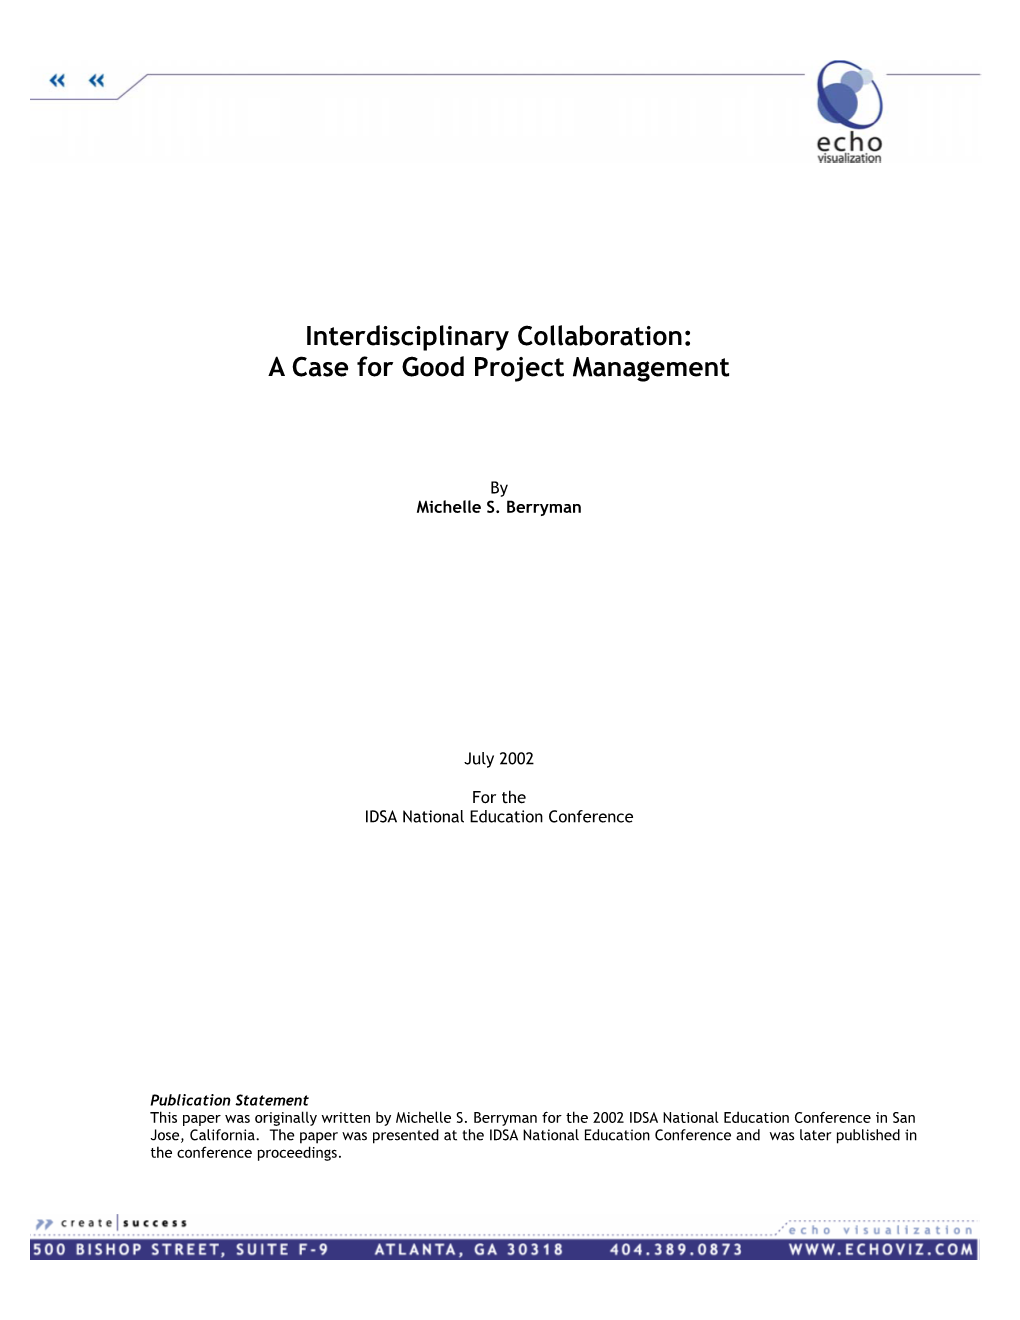 Interdisciplinary Collaboration: a Case for Good Project Management